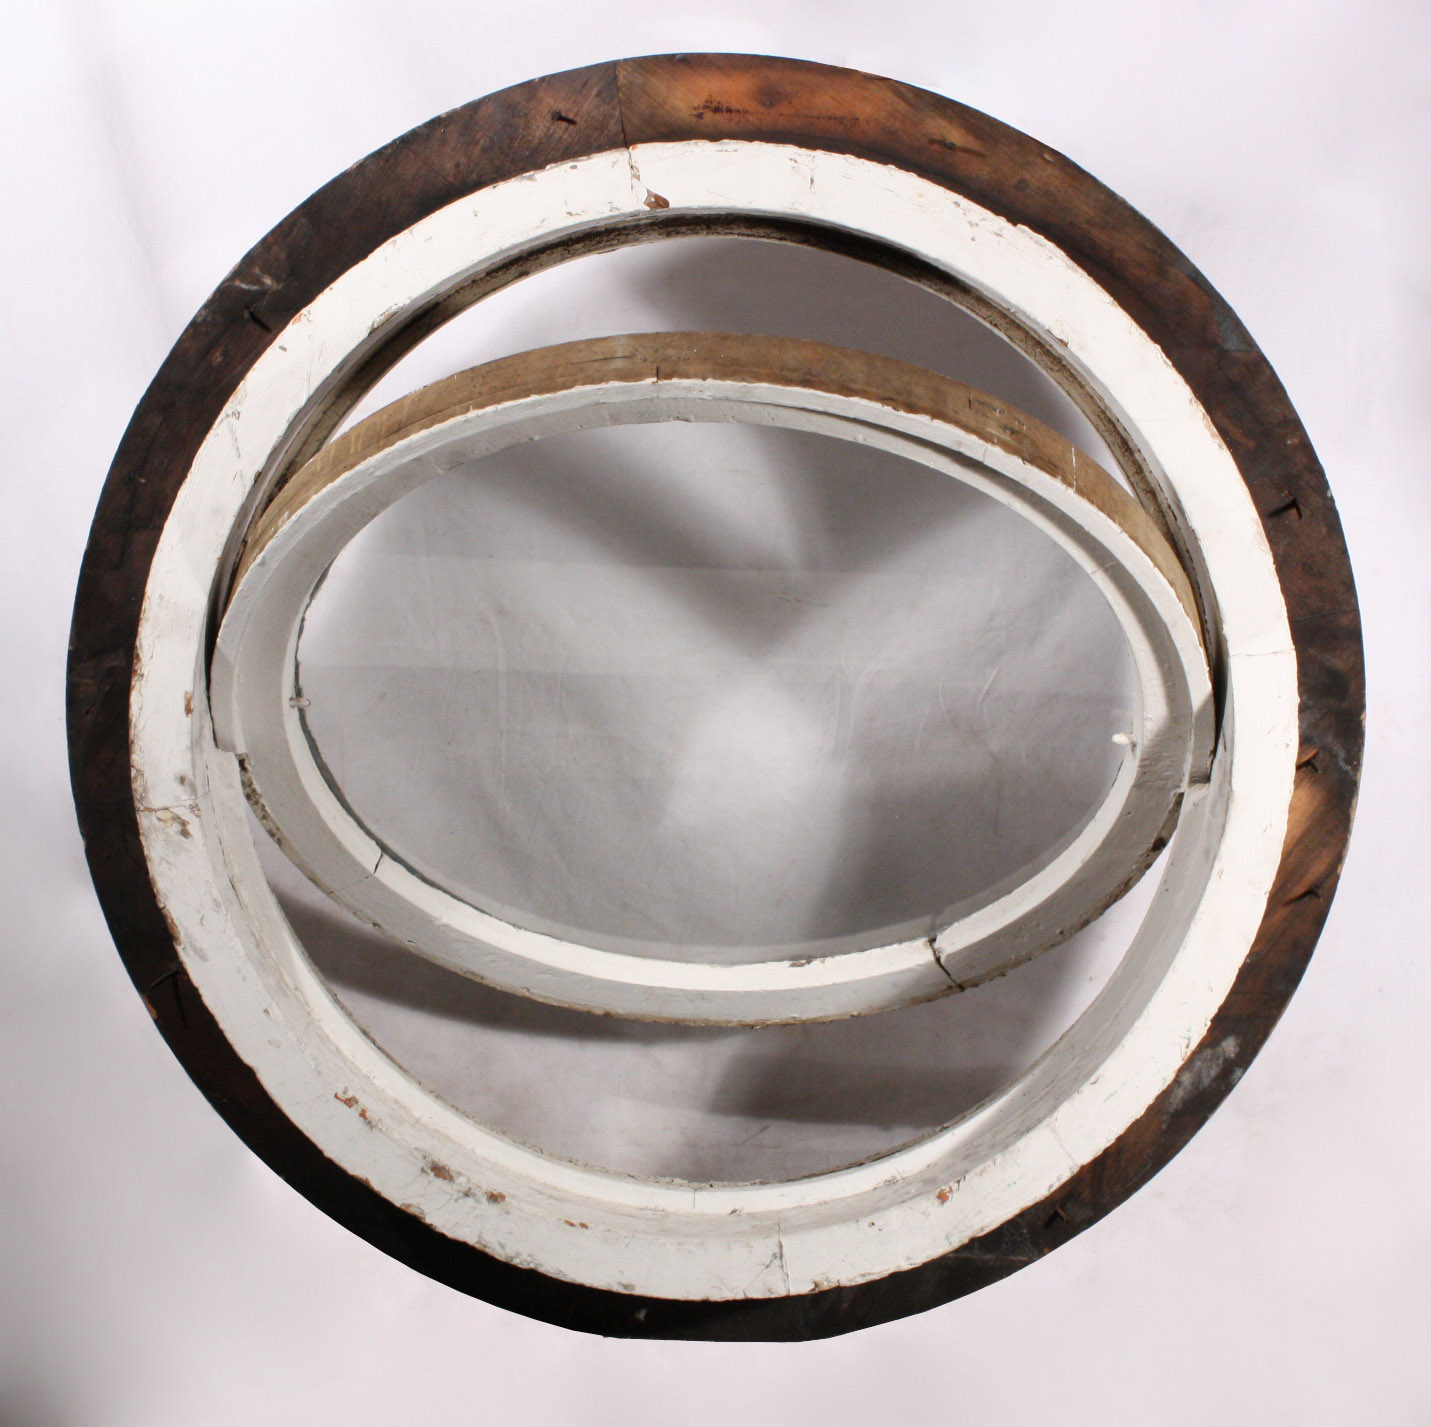 SOLD Unusual Antique Round Window with Tilting Center, Early 1900’s-21534